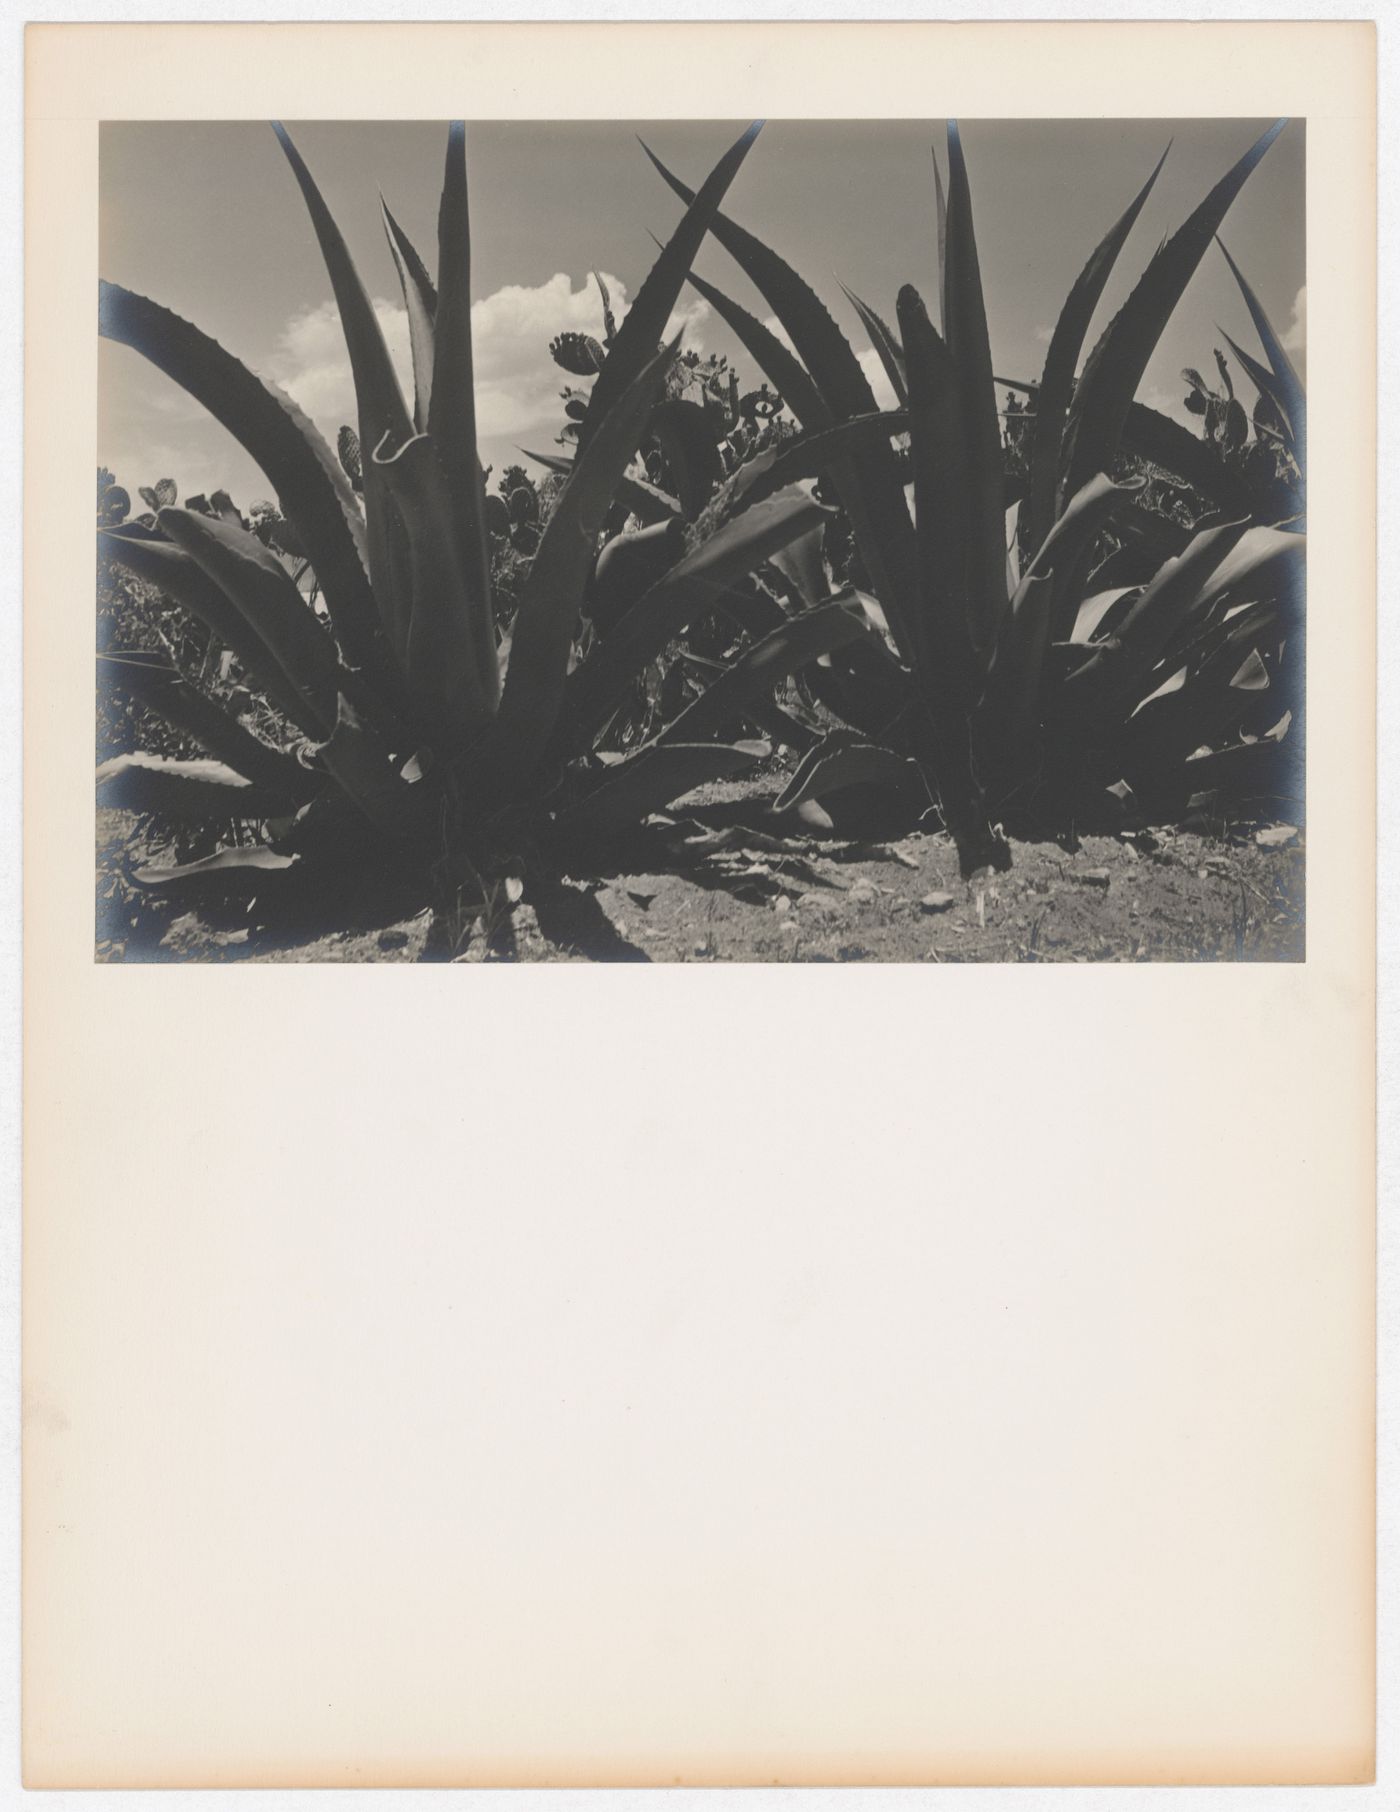 View of maguey plant, Mexico